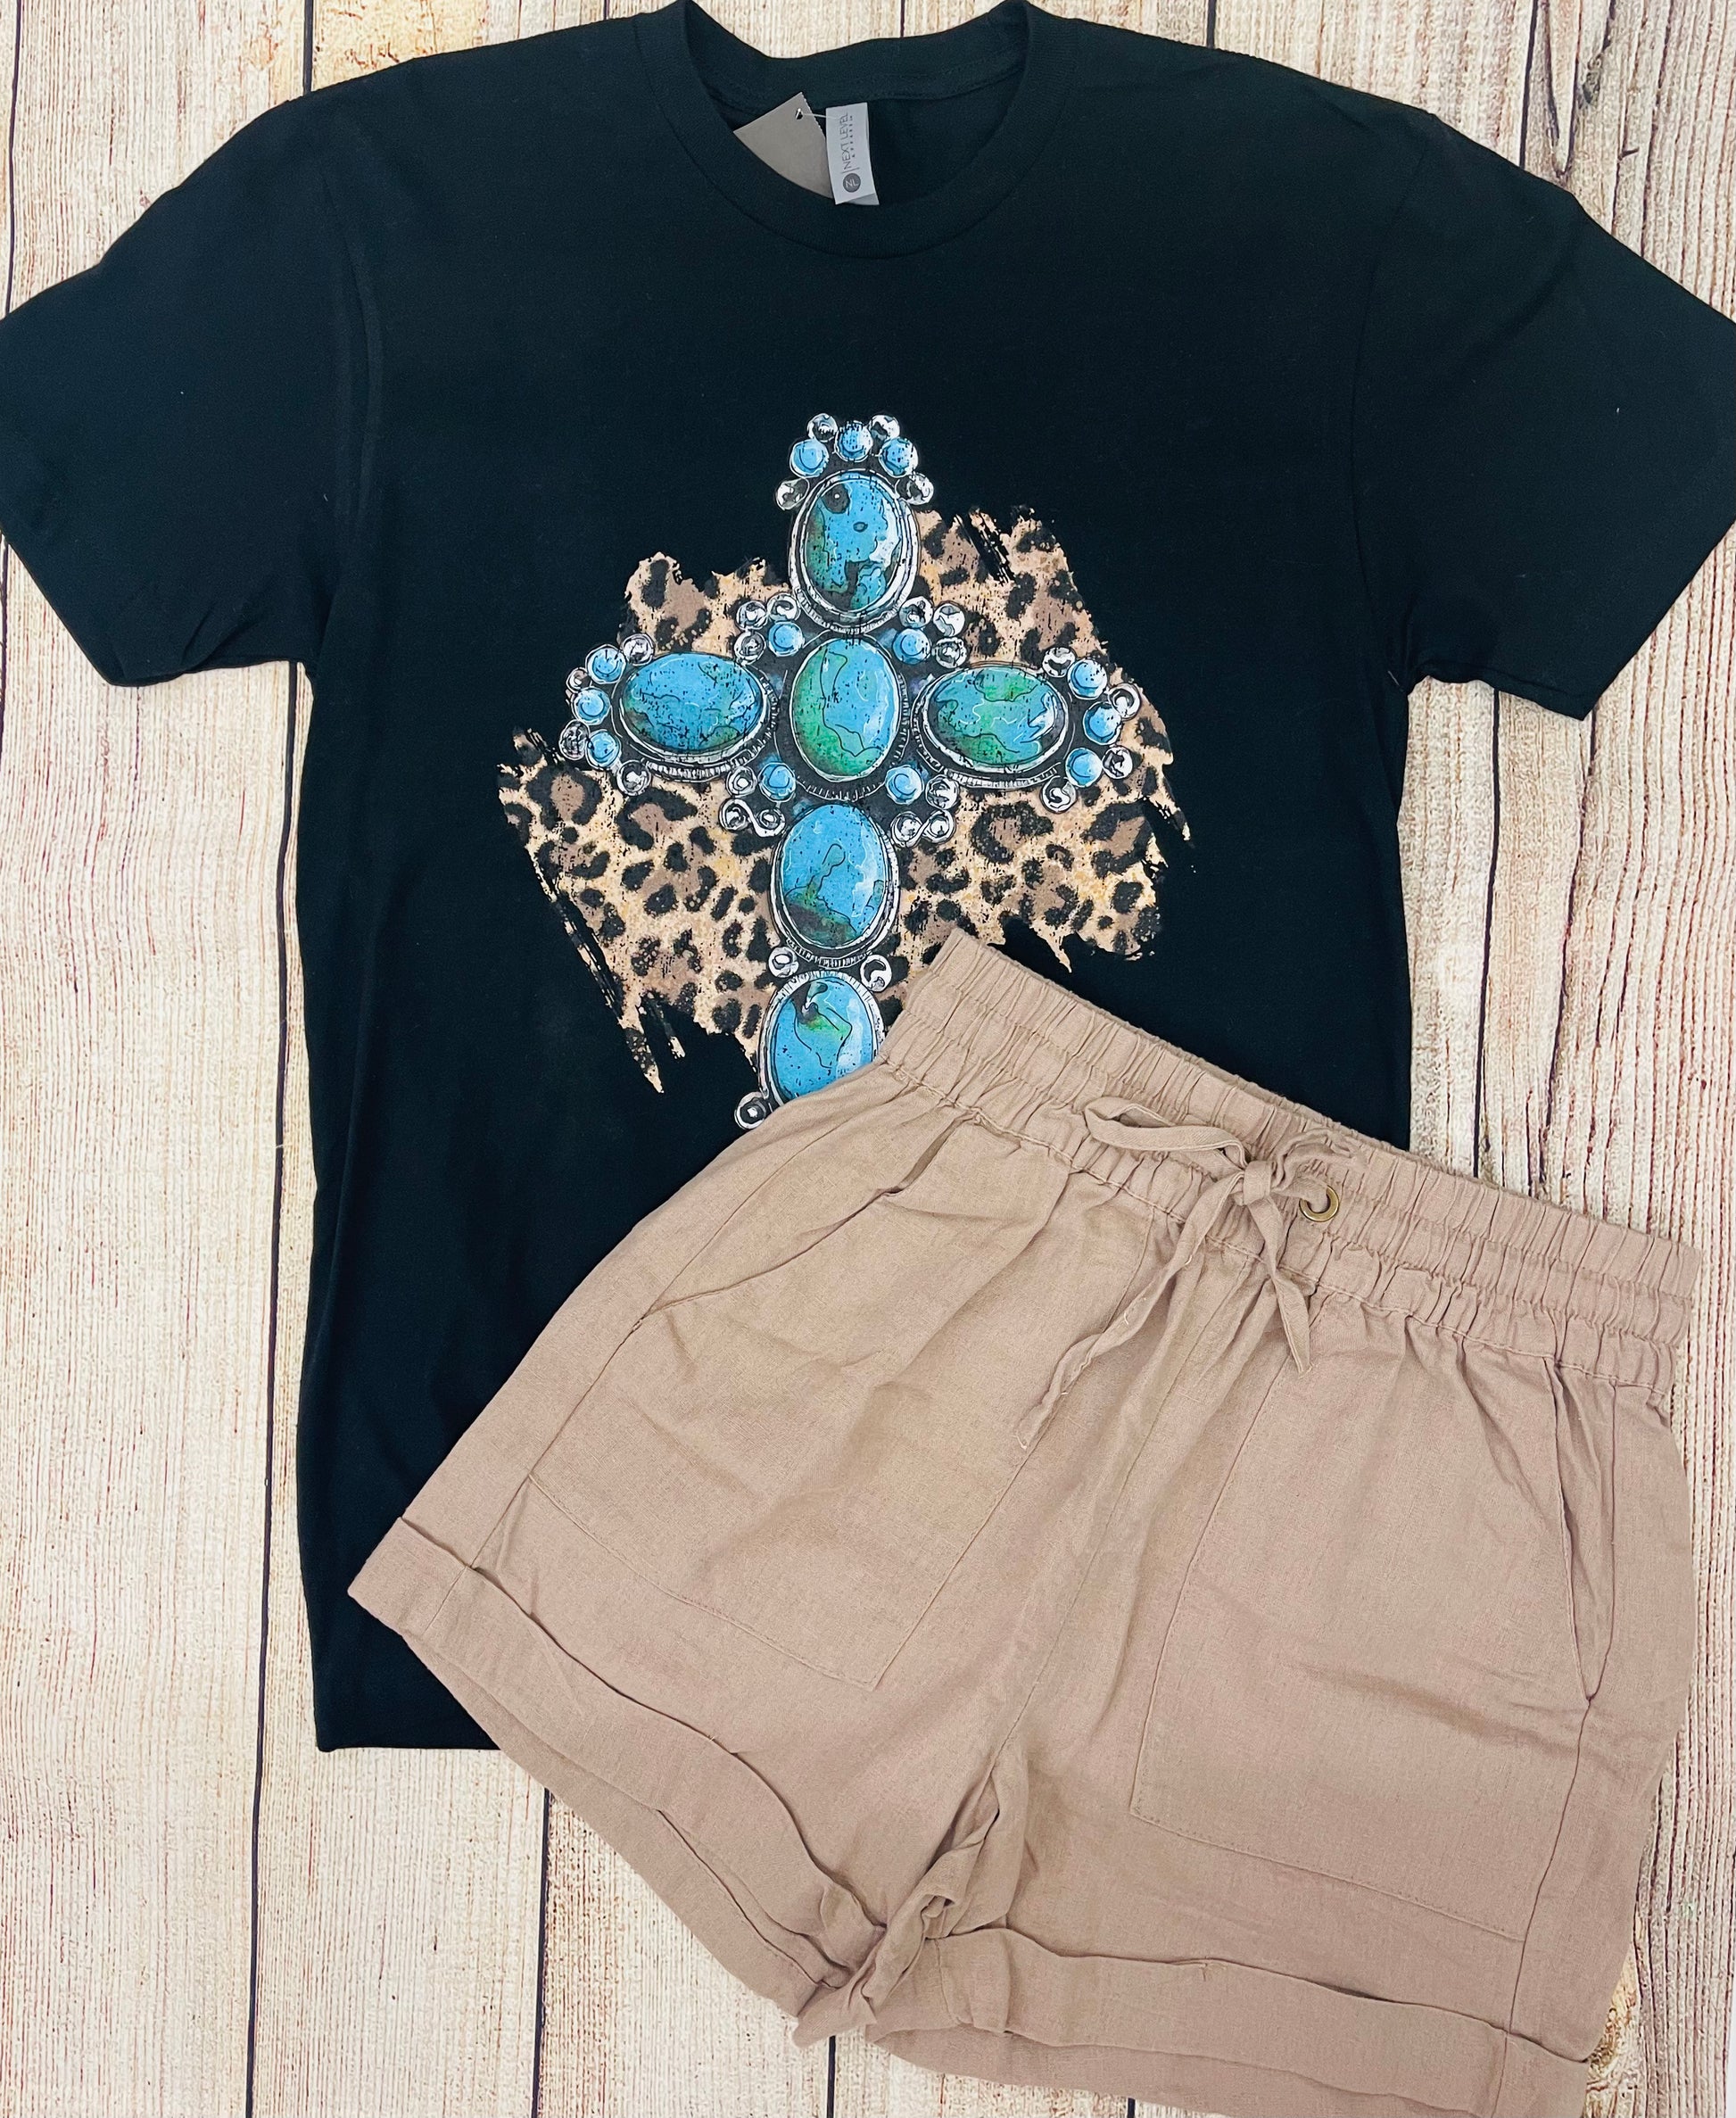 This is a black tee with a colorful graphic featuring a leopard background with a stone turquoise cross. It is a regular unisex fit with a crew neckline.